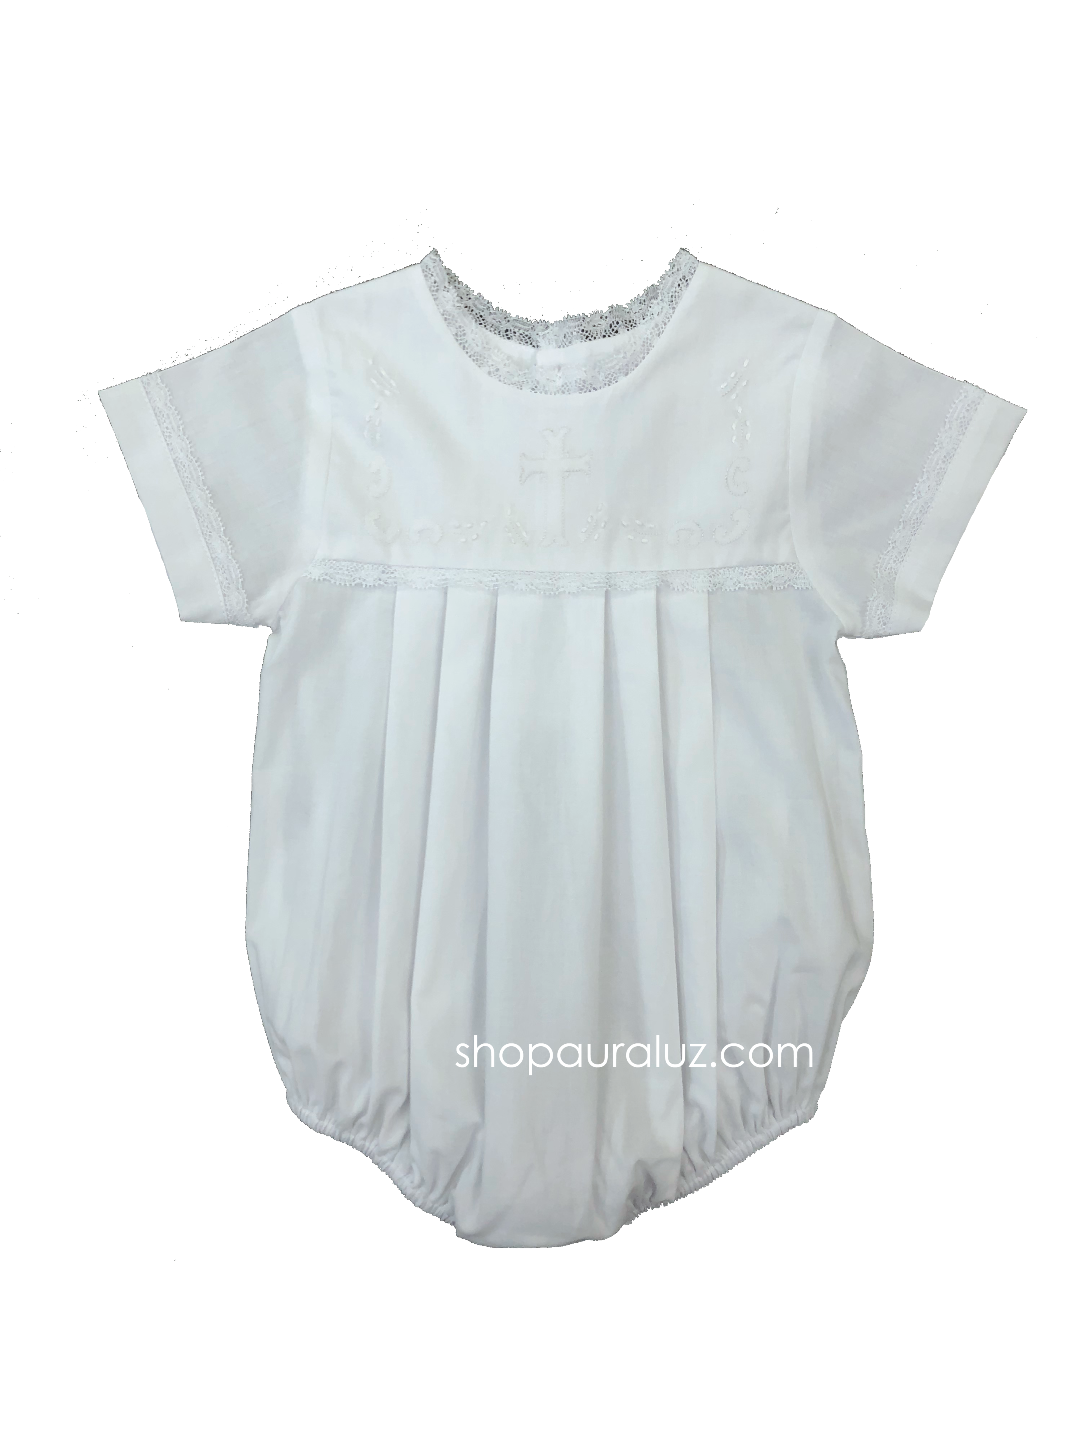 Auraluz Boy Bubble..White with white lace, no collar and embroidered cross